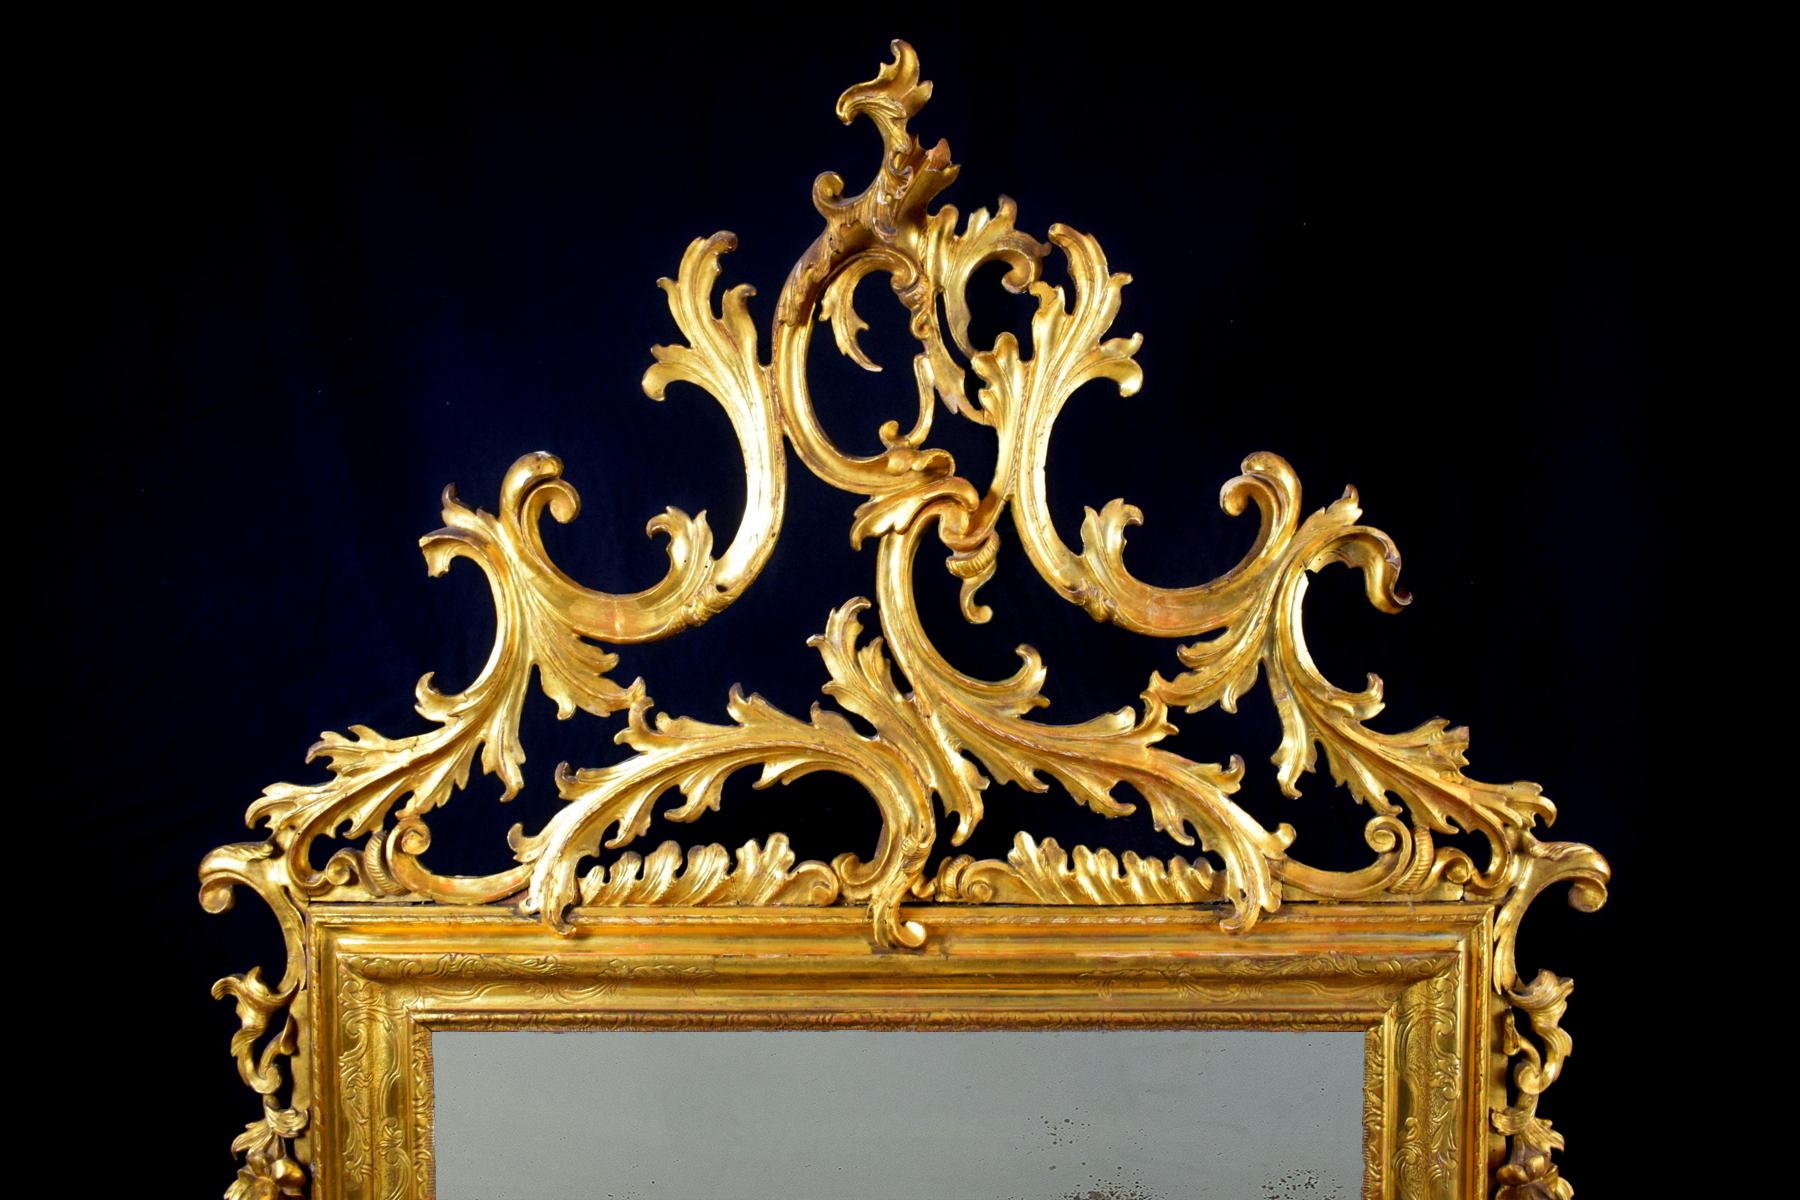 18th century Venetian carved and giltwood mirror

The large and finely carved and giltwood mirror was made in Italy, Venetian, in the first half of the 18th century.
It has a central rectangular frame and molded. From the frame start soft swirls